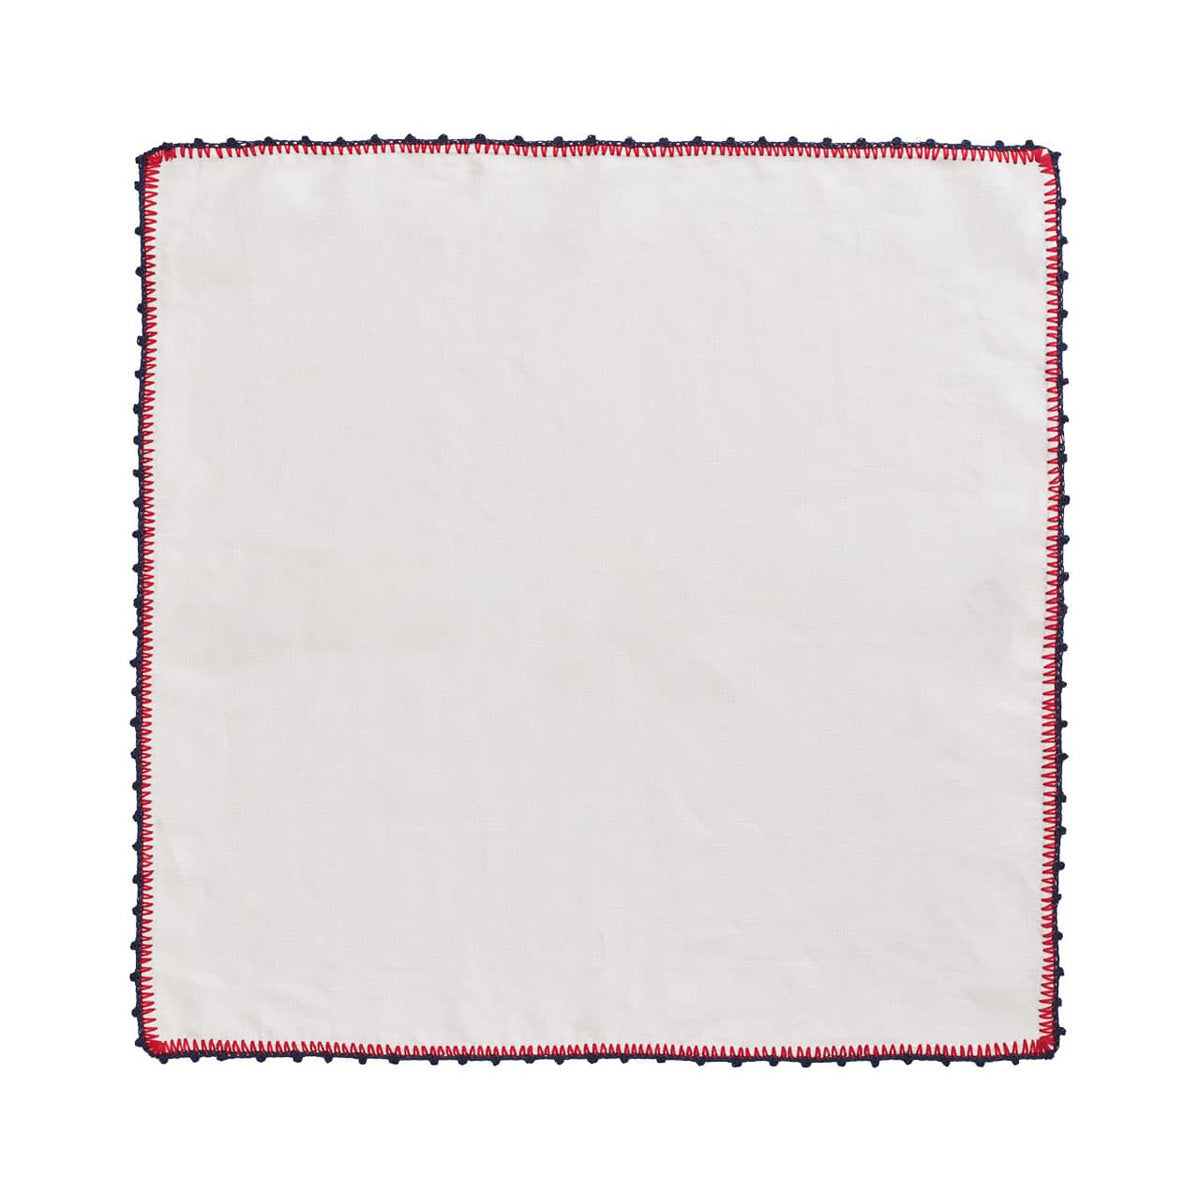 Knotted Edge Napkin - Set of 4 by Kim Seybert Additional Image-22